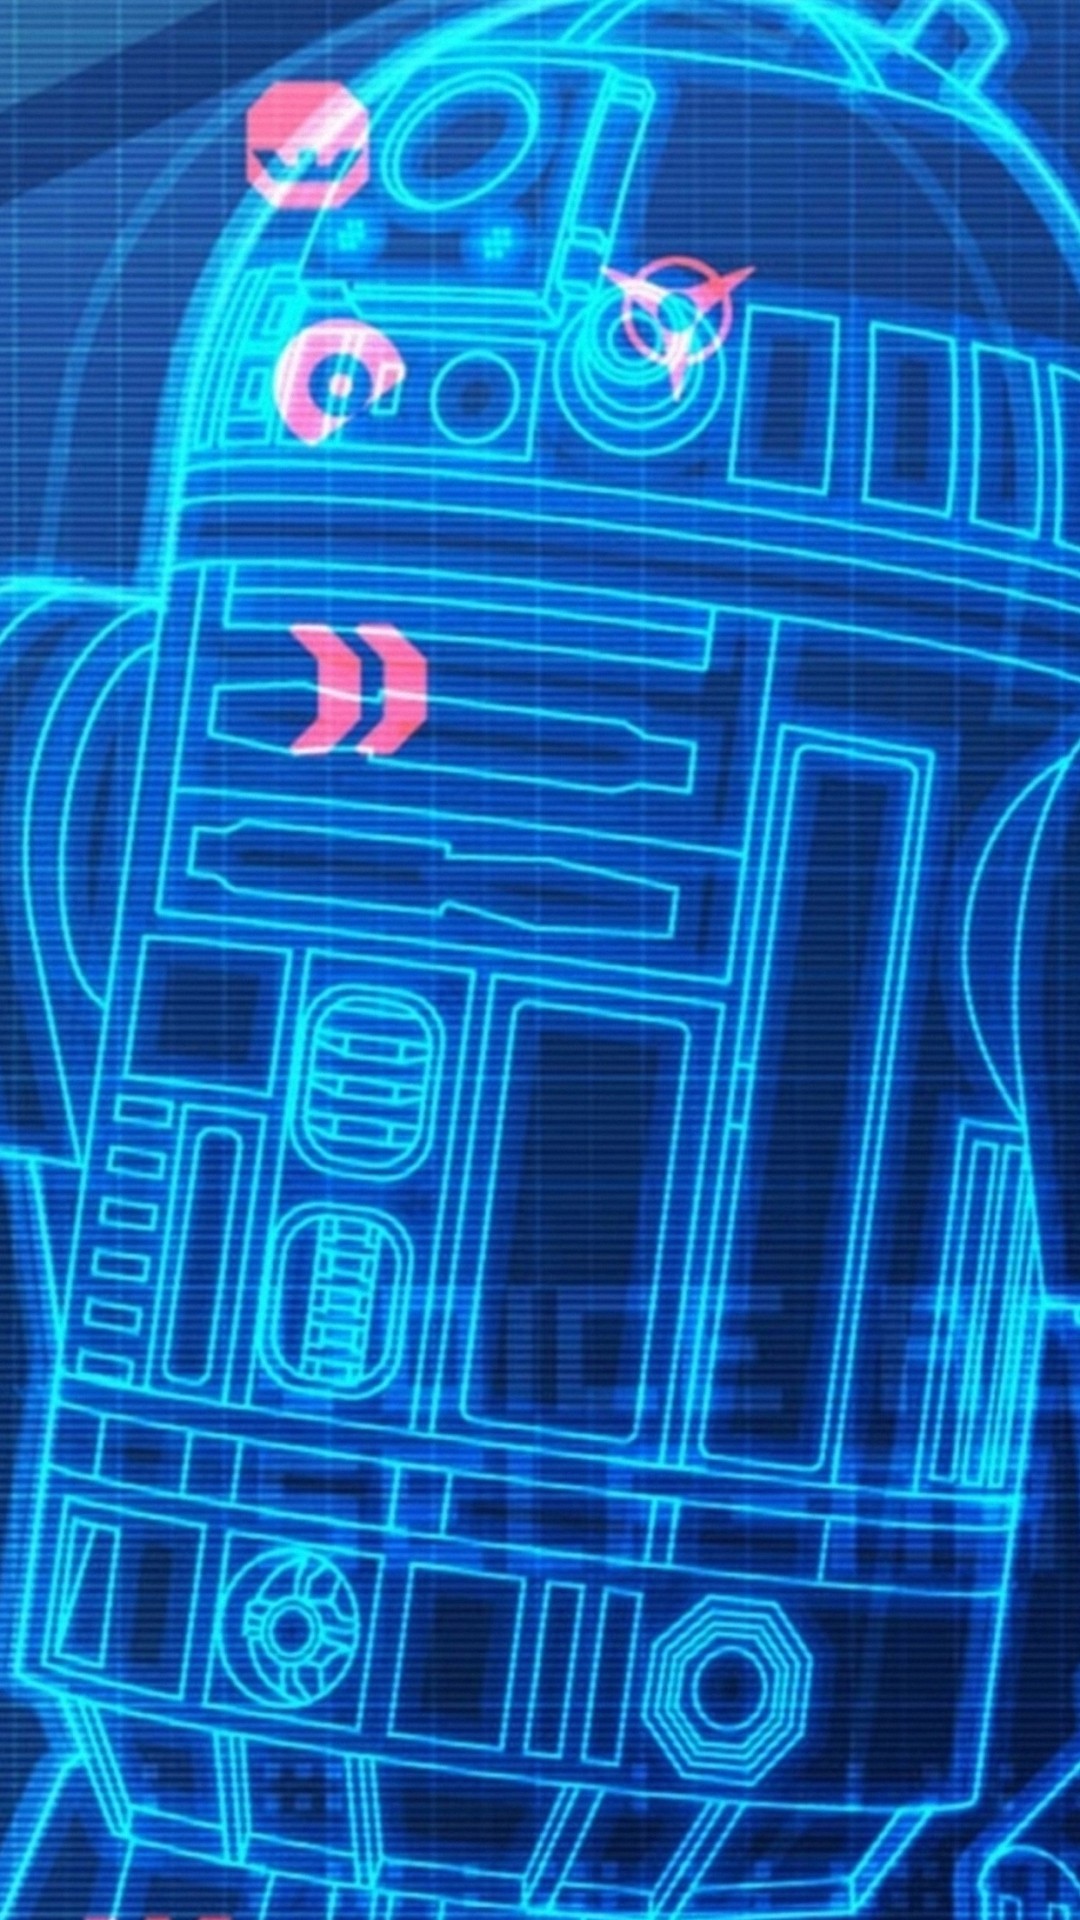 R2d2 Star Wars Iphone Wallpapers